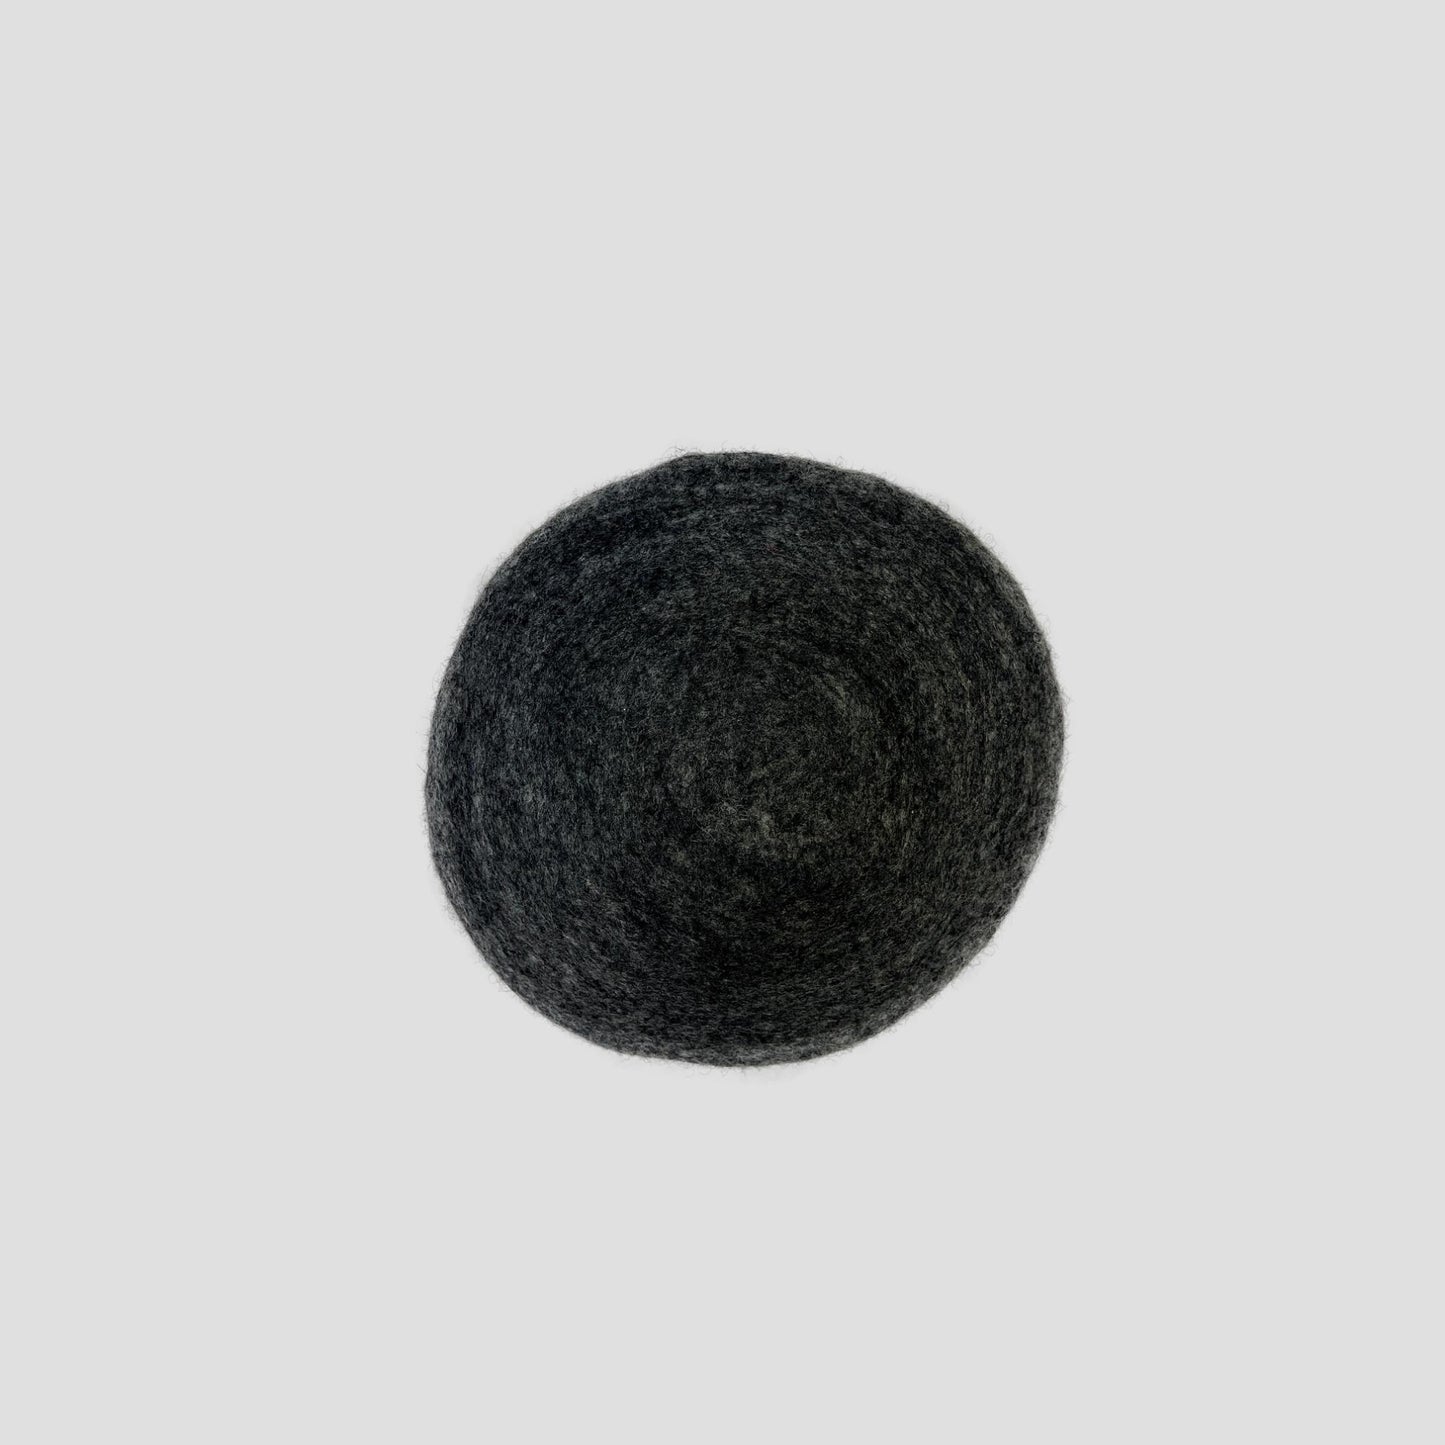 Wet Felted Charcoal Gray Bowl